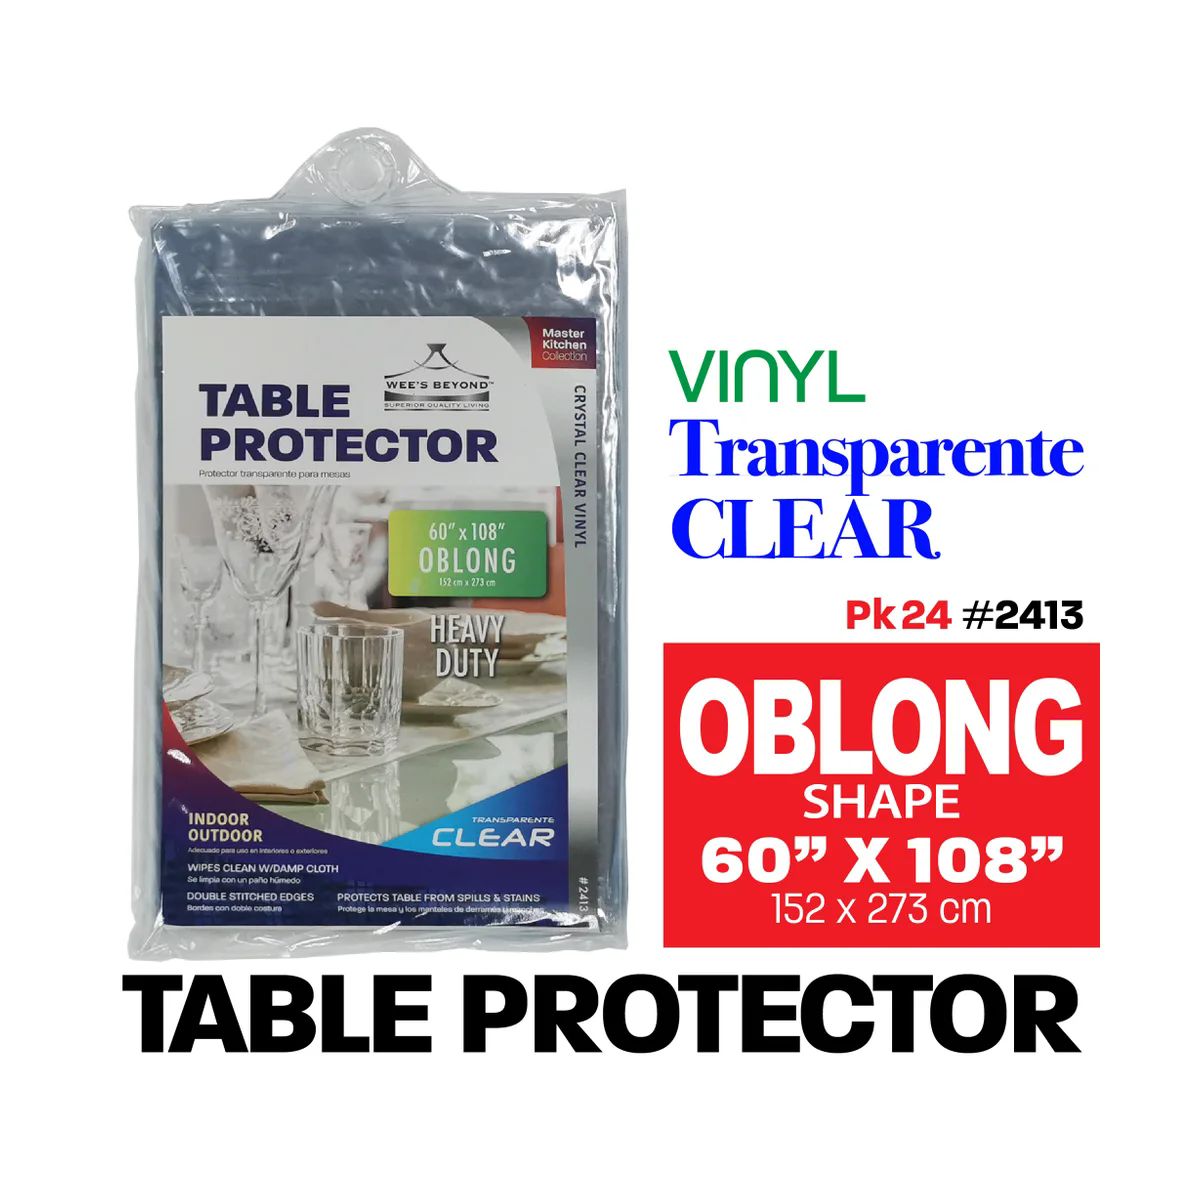 24 Pieces of Oblong Clear Pcv Table Protector - 60" X 108"